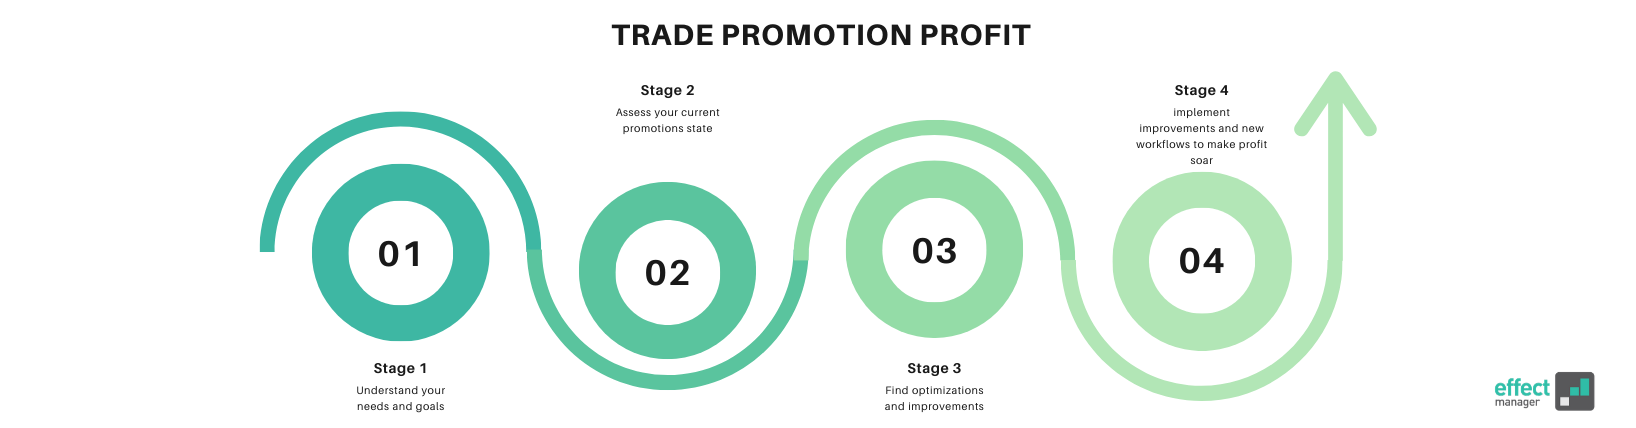 Increase Trade Promotion Profit through Trade Promotion Management